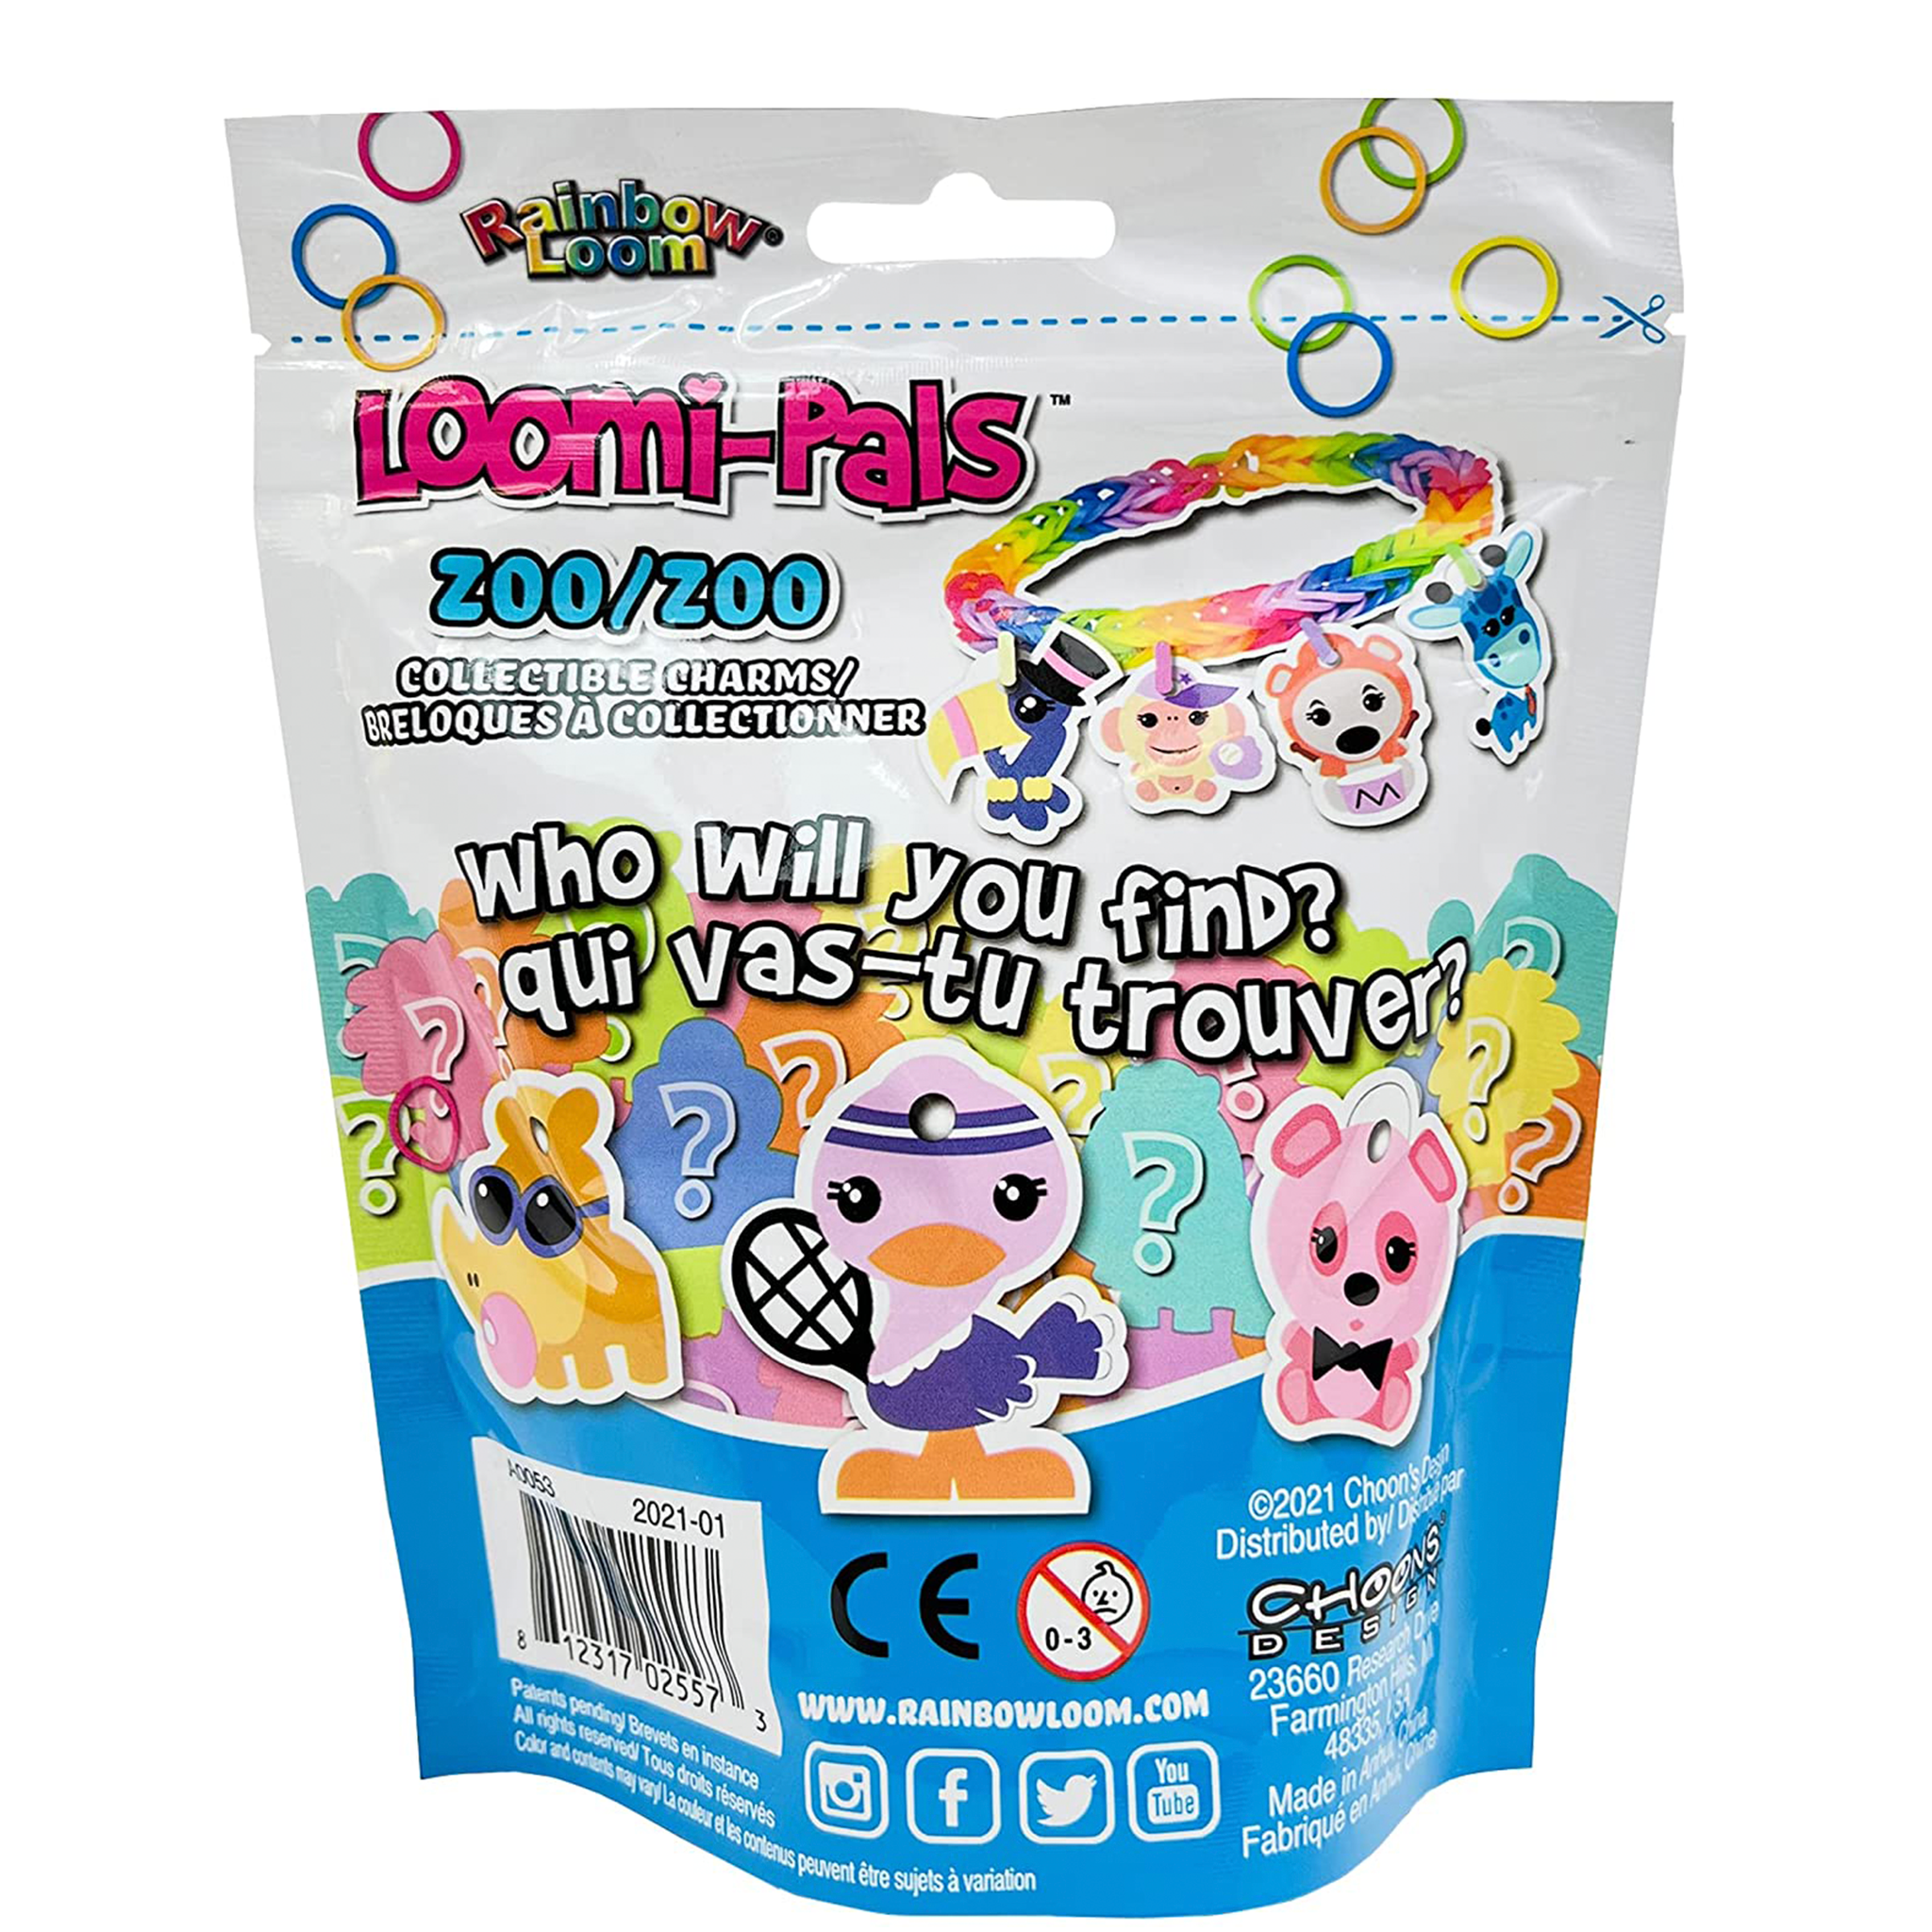 Loomipals Fun Pack Assortment, Fairy – Over The Moon